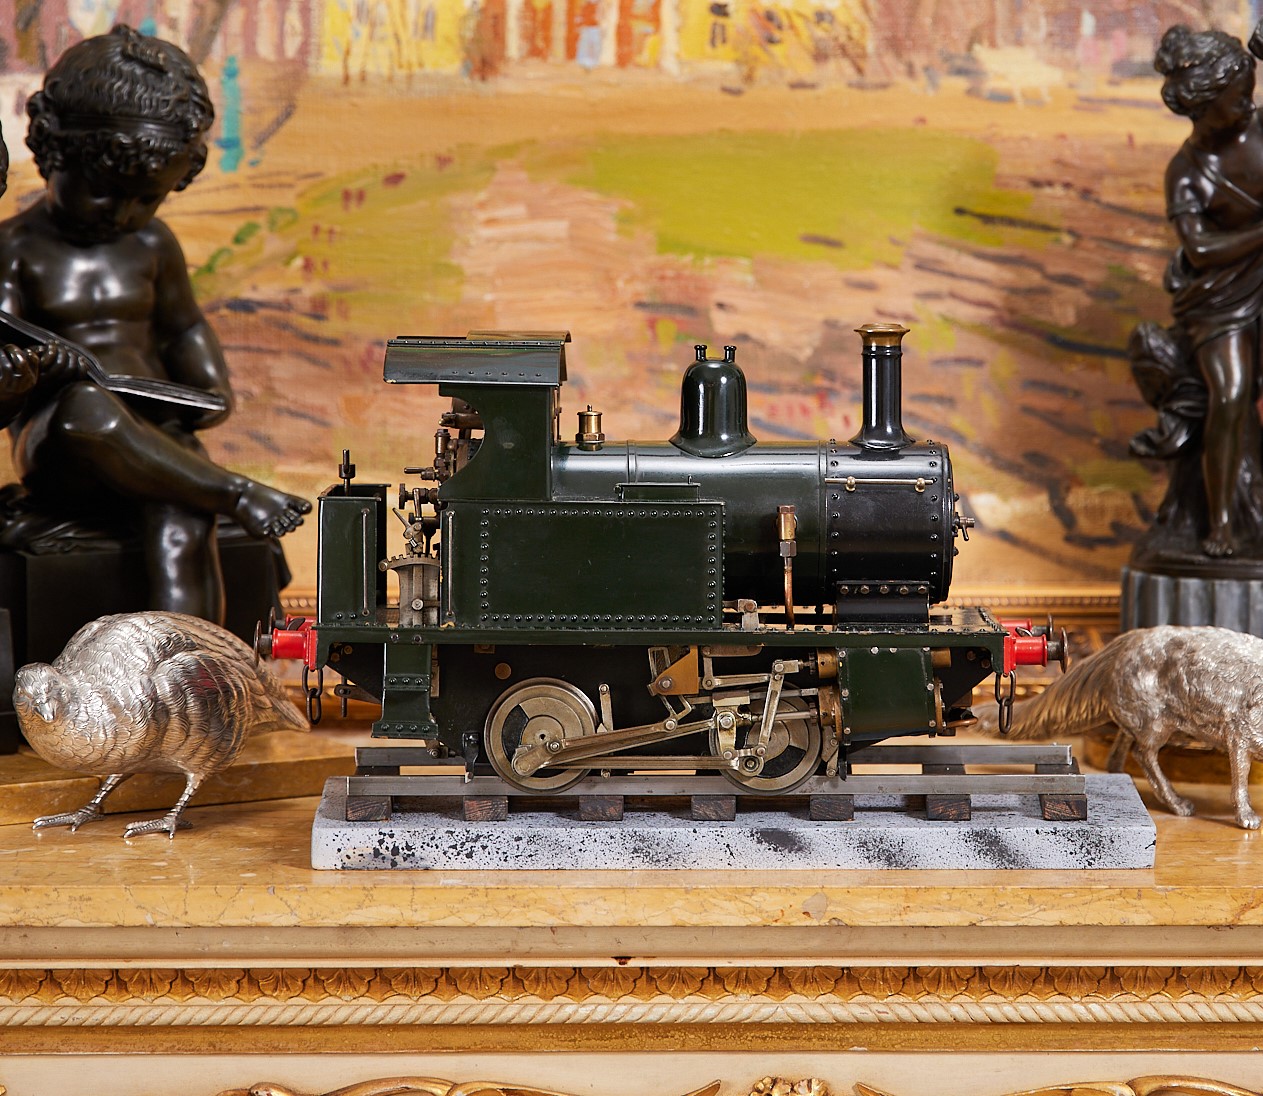 A FULL WORKING MODEL OF A STEAM TRAIN - Image 16 of 45